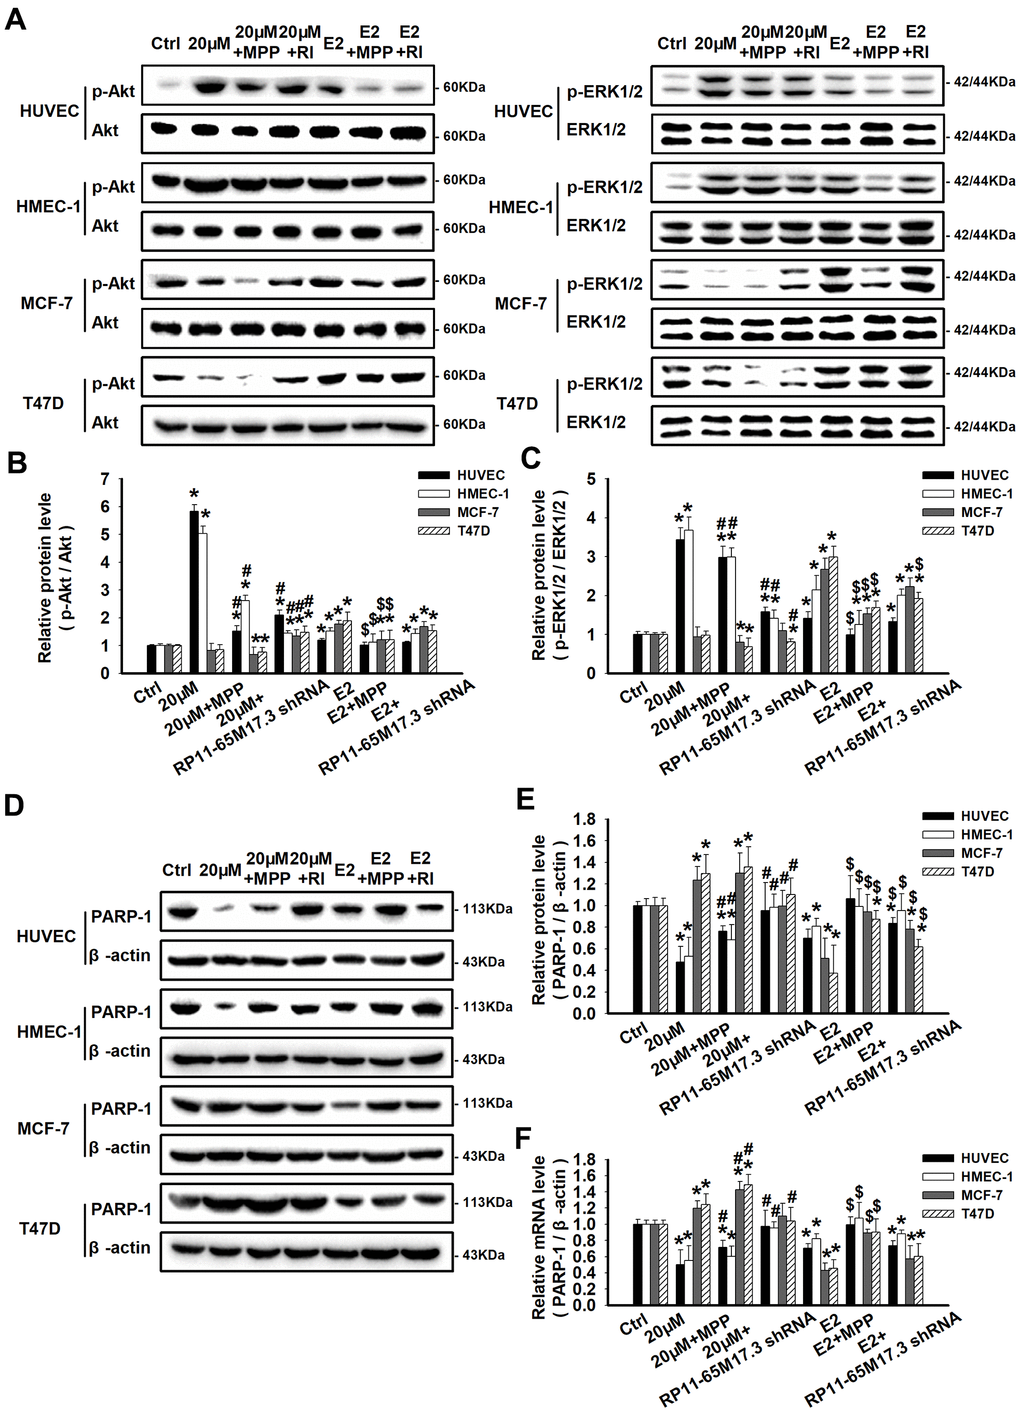 Regulation of RP11-65M17.3-ERα loop signaling by calycosin in ECs and BCCs. HUVECs, HMEC-1 cells, MCF-7 cells and T47D cells were pretreated with RP11-65M17.3 shRNA or MPP before incubation with 20 μM calycosin or 10 nM E2 alone. (A–C) The phosphorylation of Akt and ERK1/2 was detected by Western blotting. The corresponding total proteins were used as the internal controls in the same sample. (D–F) The protein and mRNA expression levels of PARP-1 were determined using Western blotting and qRT-PCR. The expression levels were normalized to those of β-actin. Representative data from three independent experiments are shown. *p #p $p 2 alone.